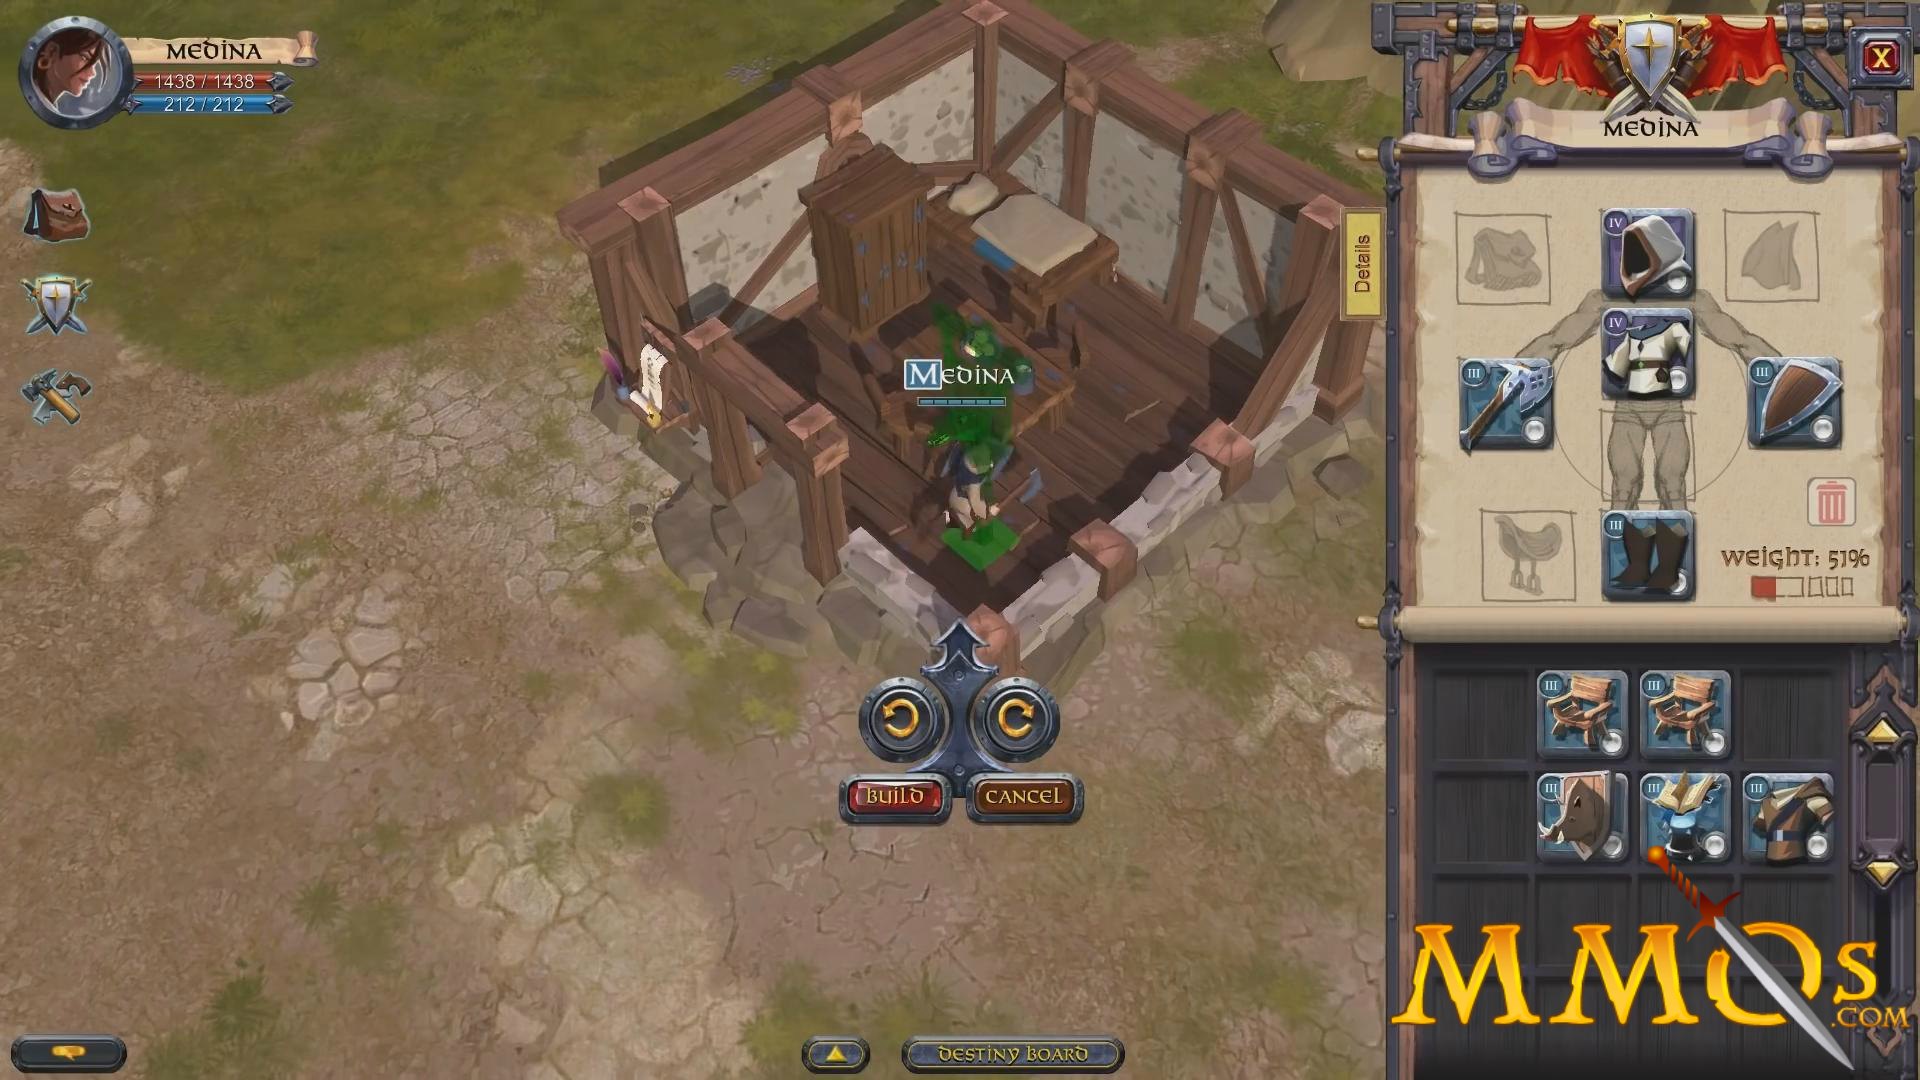 The MMO Albion Online is heading to Steam